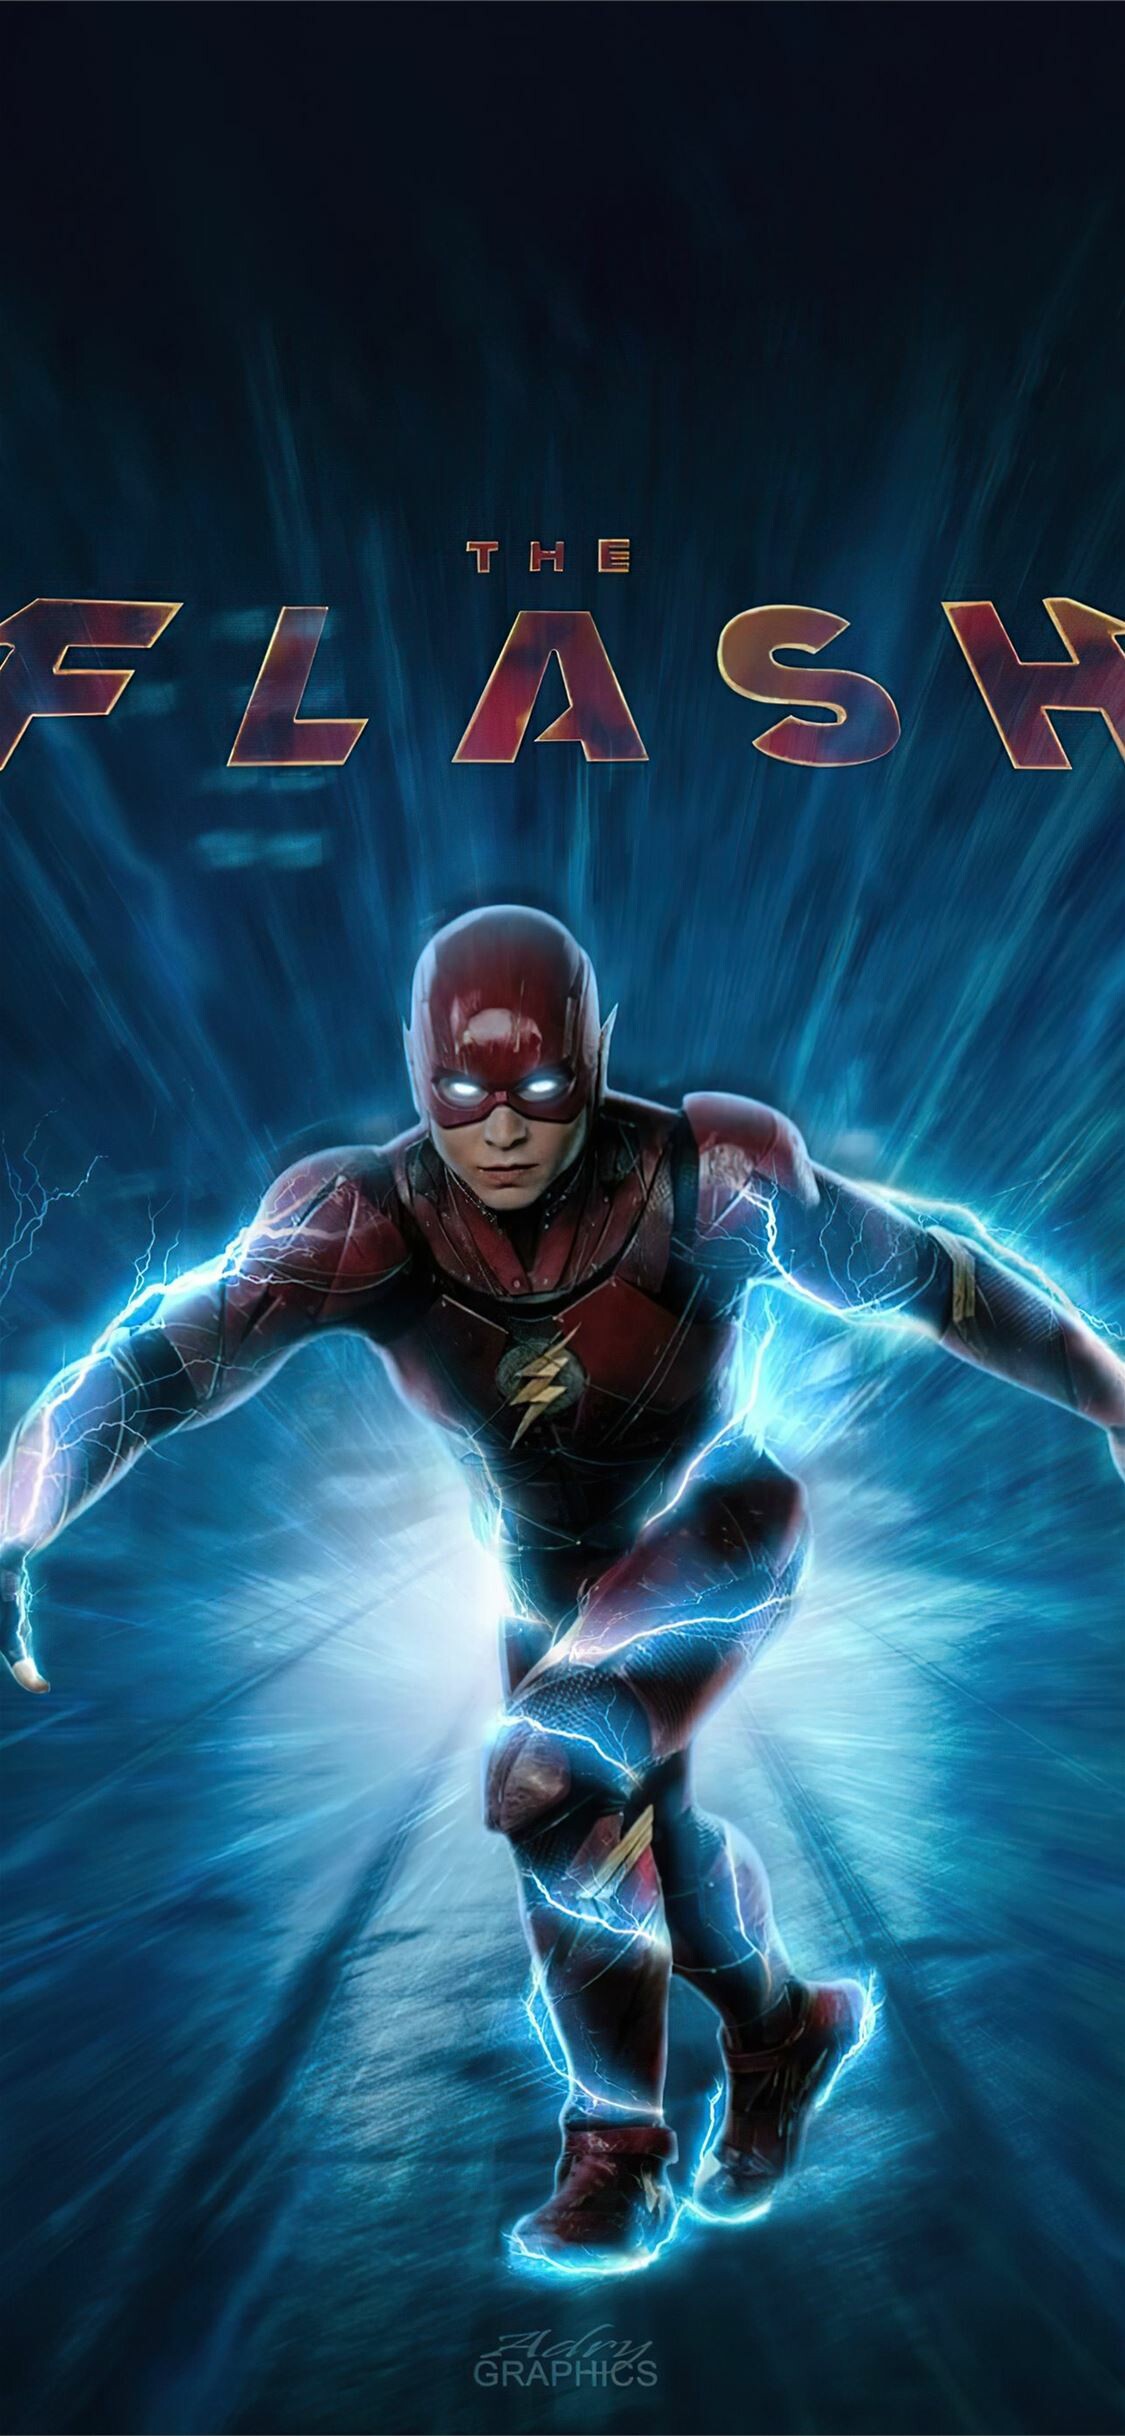 The Flash (2022): Barry Allen, A police forensic investigator from Central City and member of the Justice League. 1130x2440 HD Background.